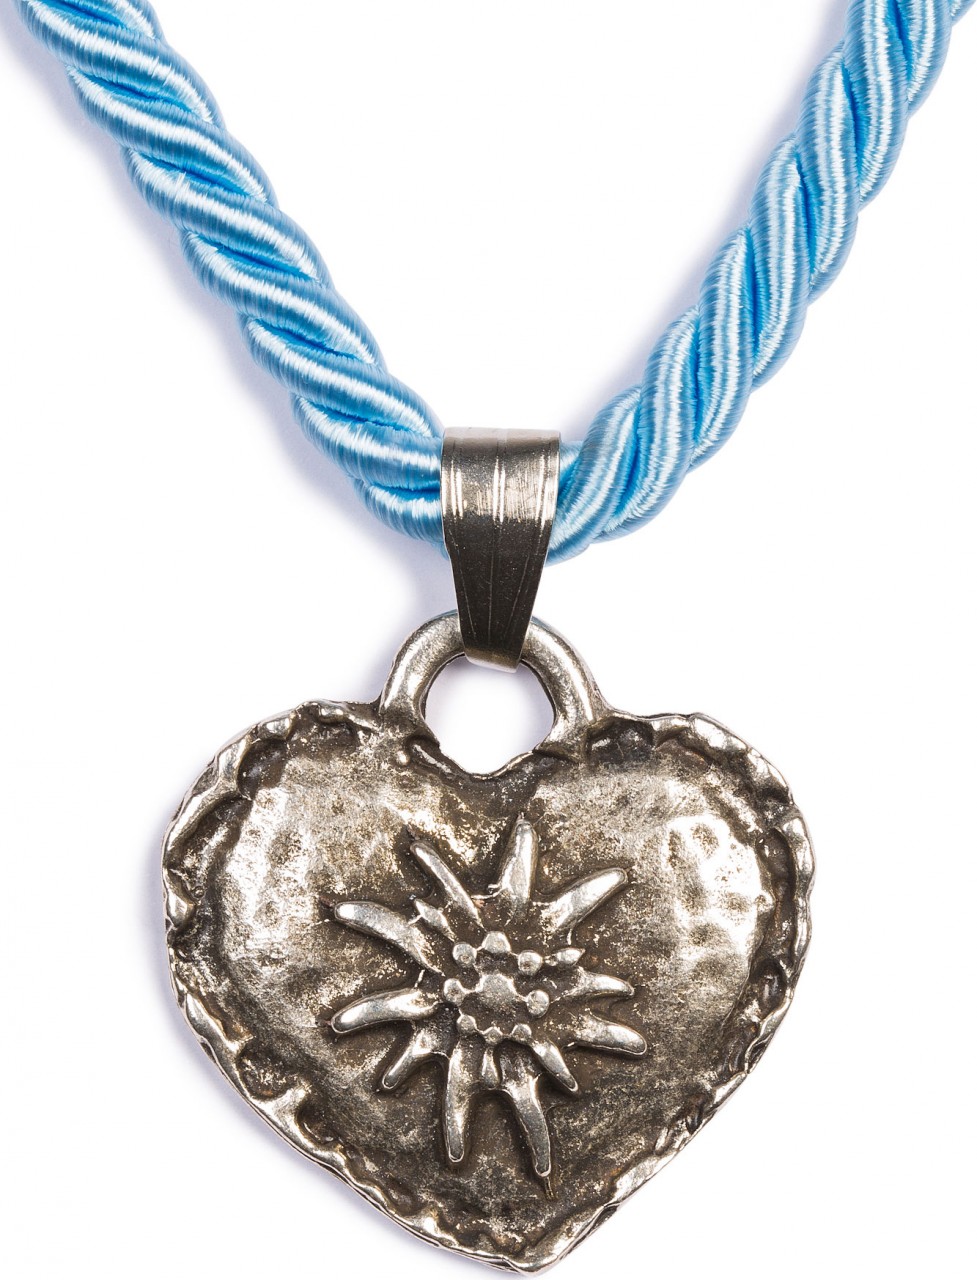 Braid Necklace with Edelweiss Heart, Light Blue